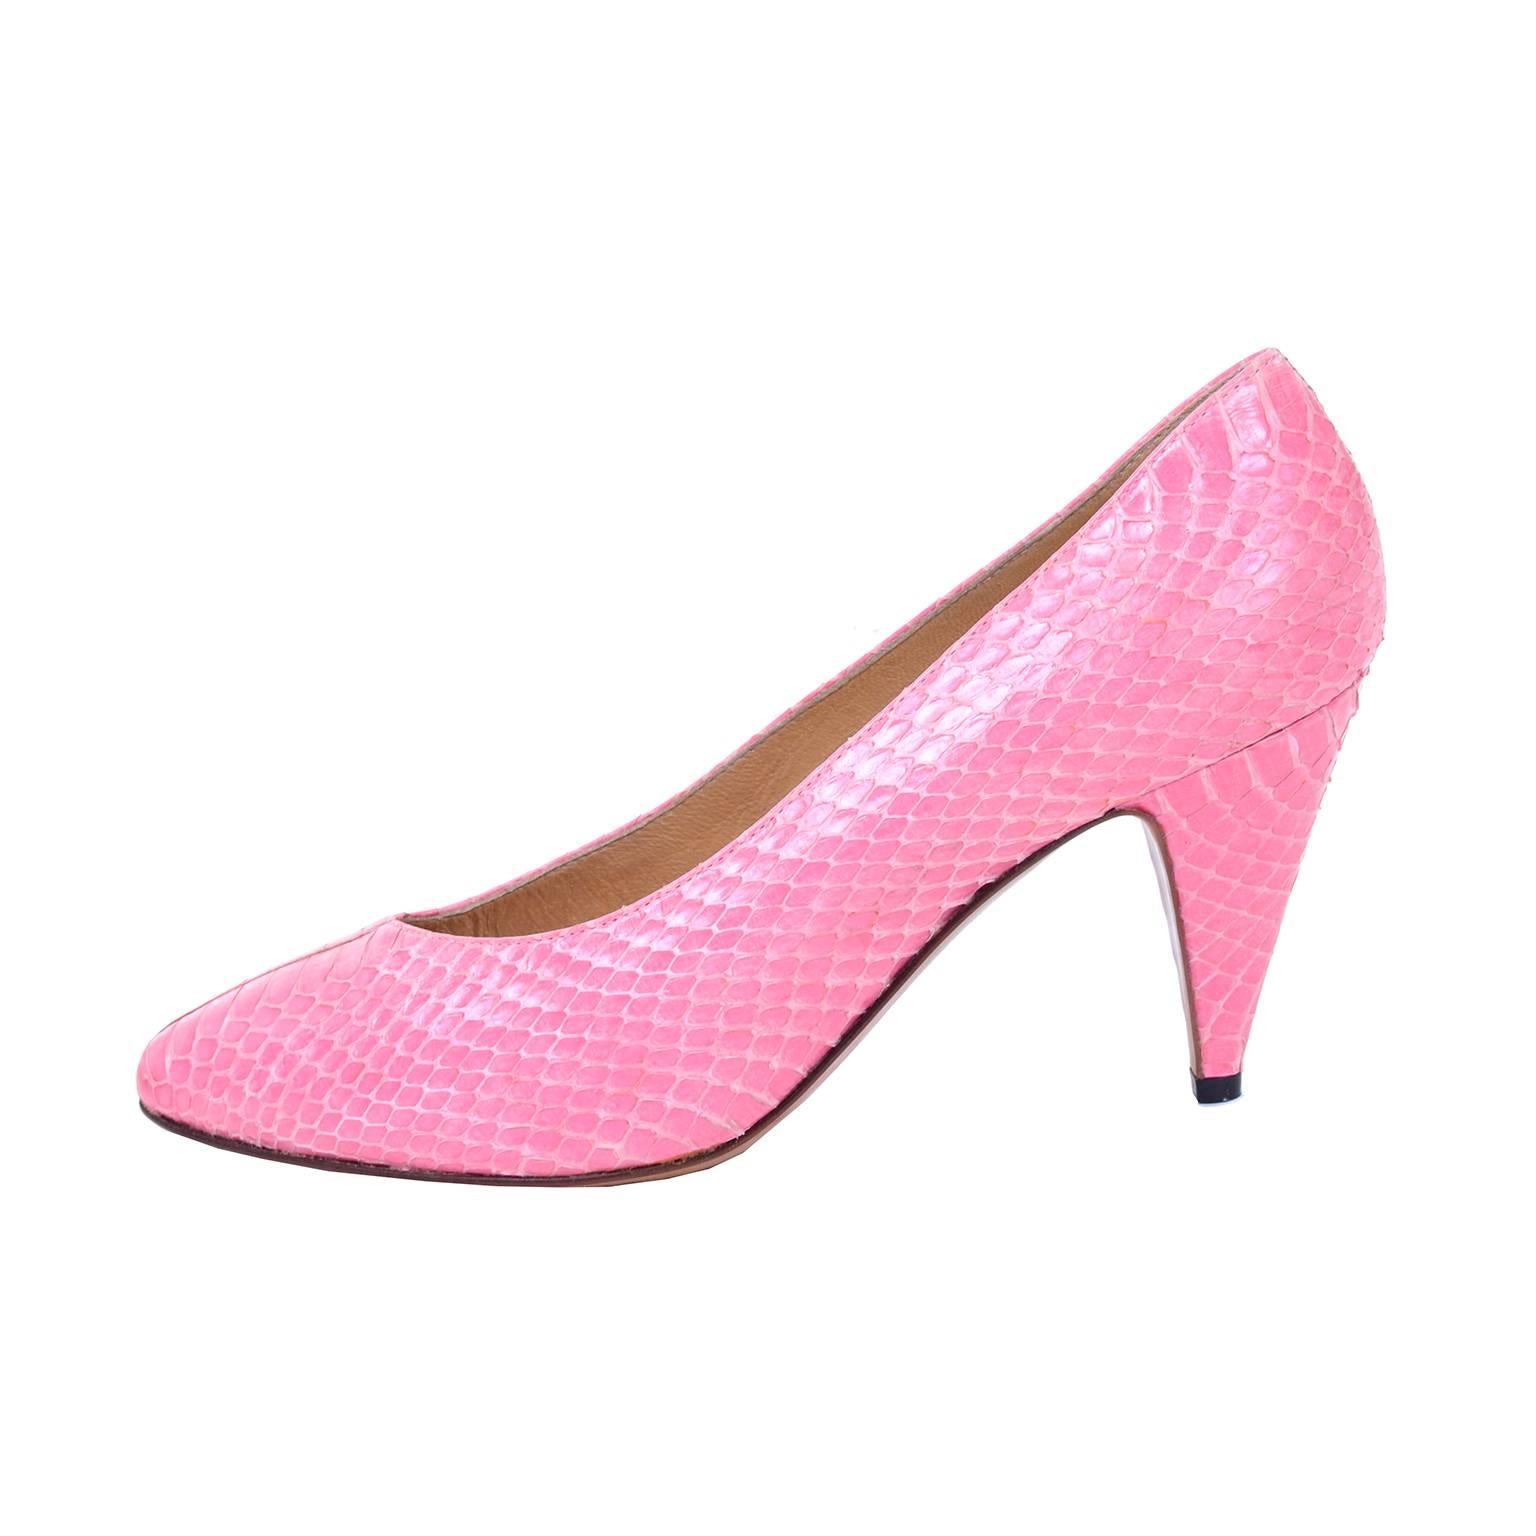 These gorgeous Manolo Blahnik vintage pink snakeskin shoes are from the 1980s and have the Manolo Blahnik London label. We acquired these along with dozens of other Blahnik shoes from the same estate and she had fabulous taste in footwear! These